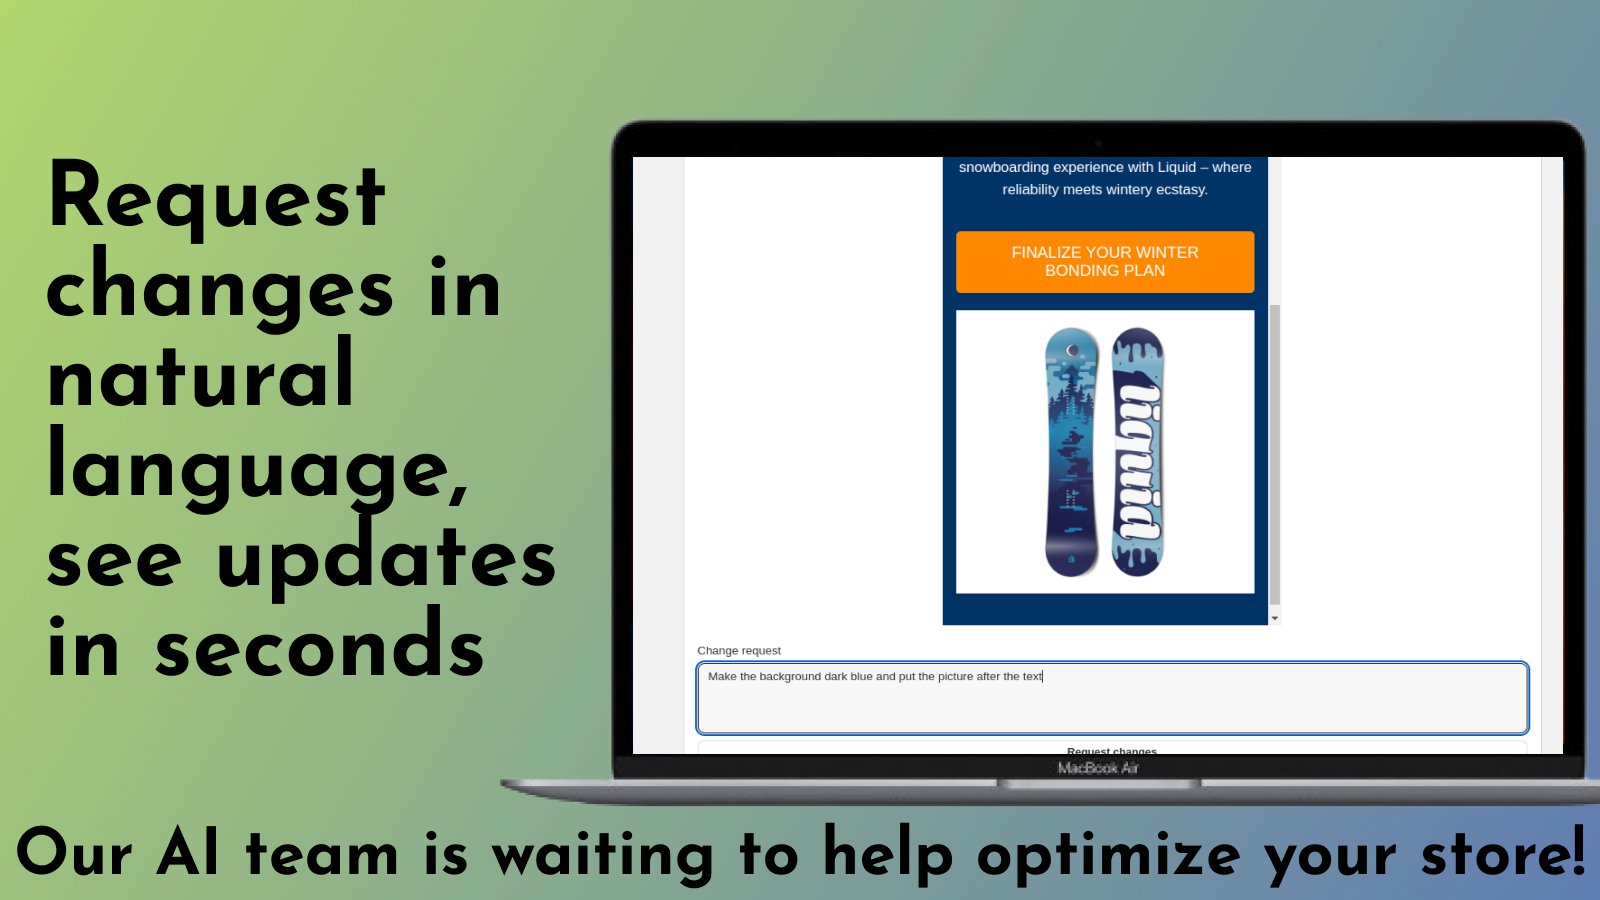 Request changes in natural language, see updates in seconds